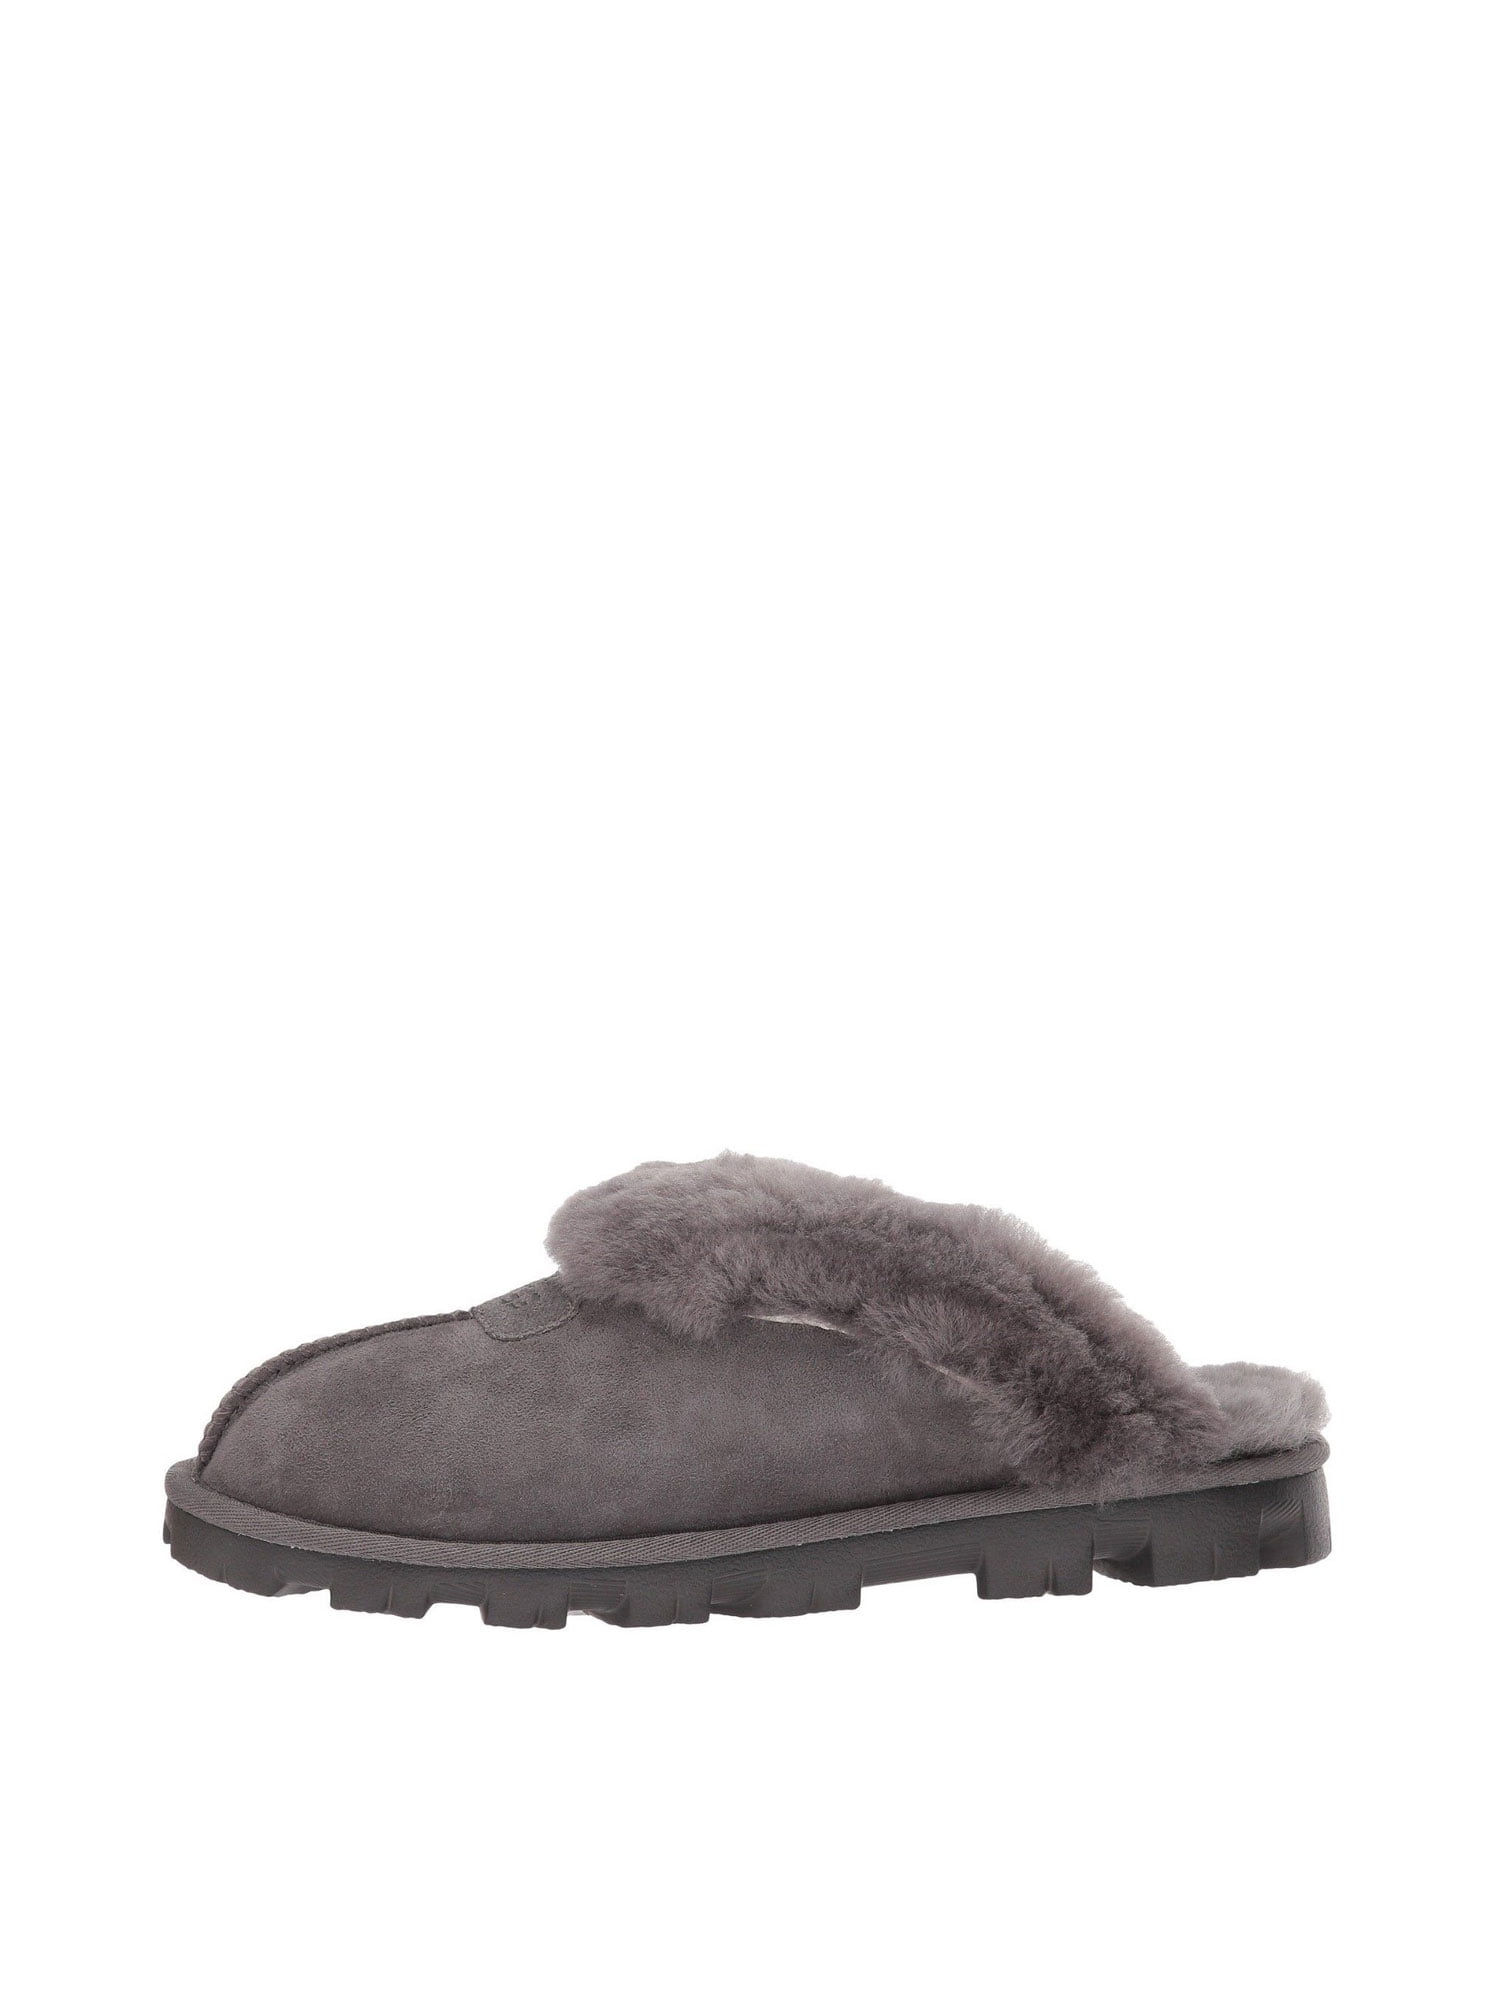 grey ugg coquette slippers